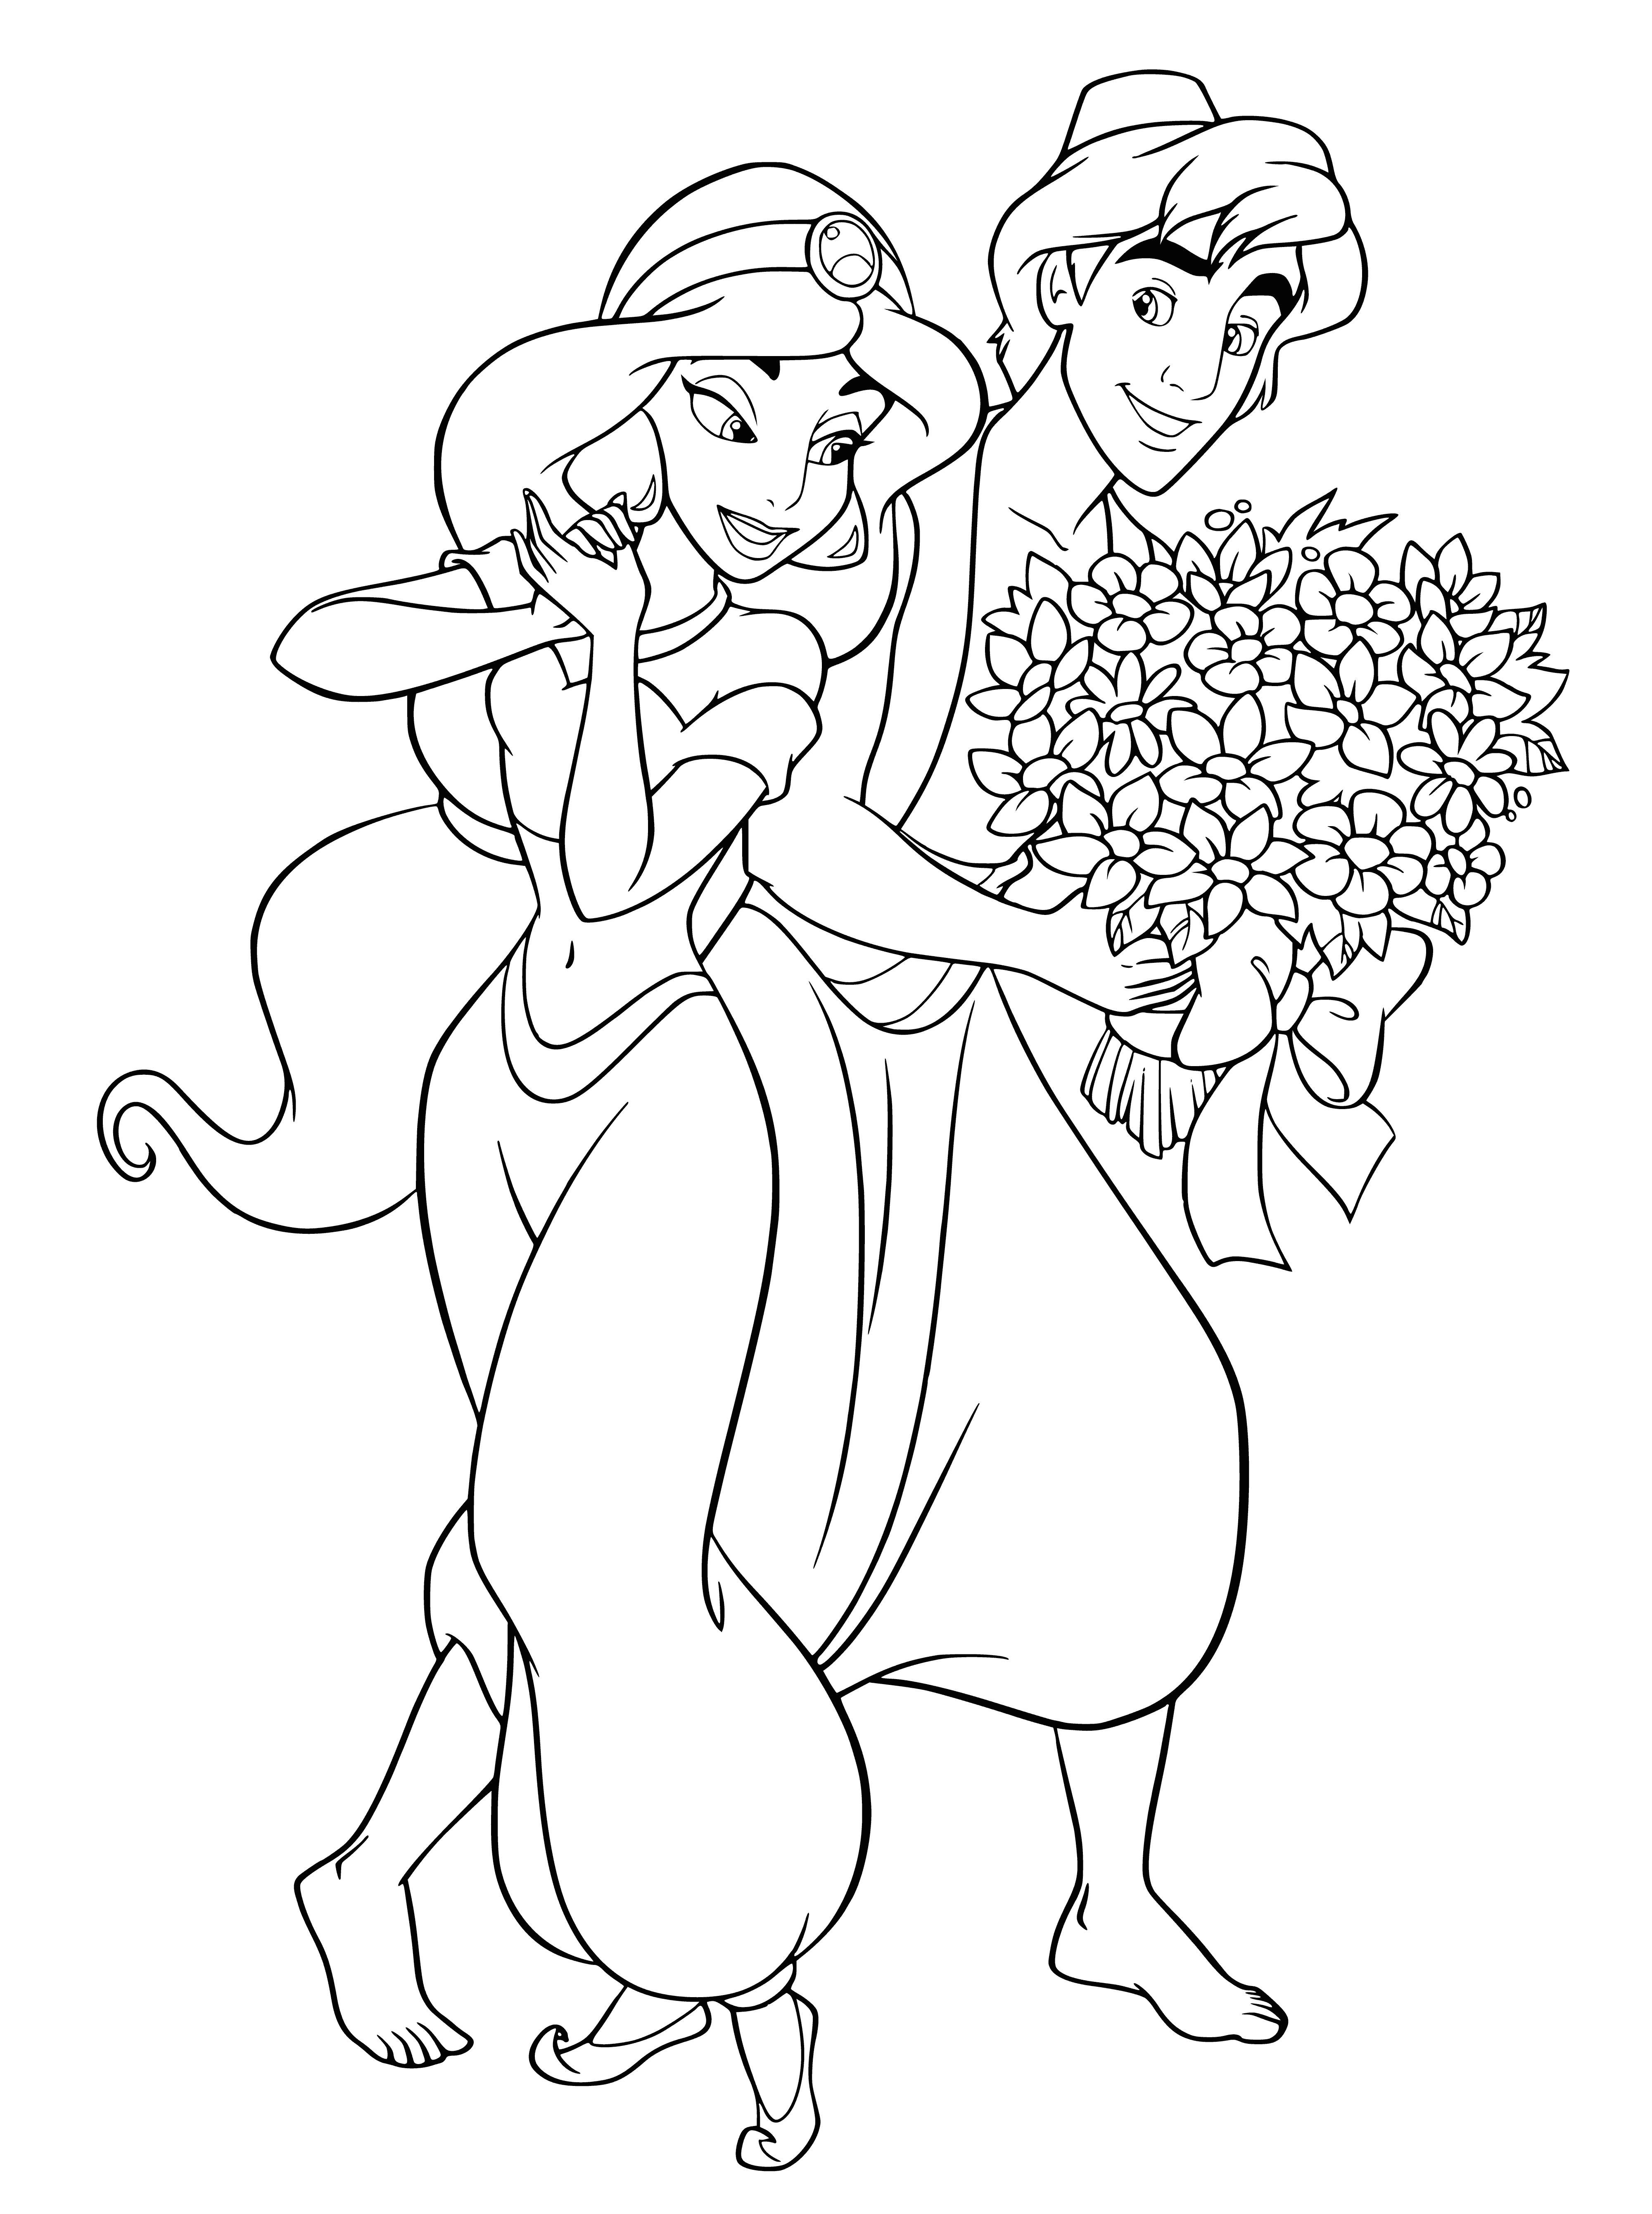 Aladdin gives Jasmine flowers coloring page